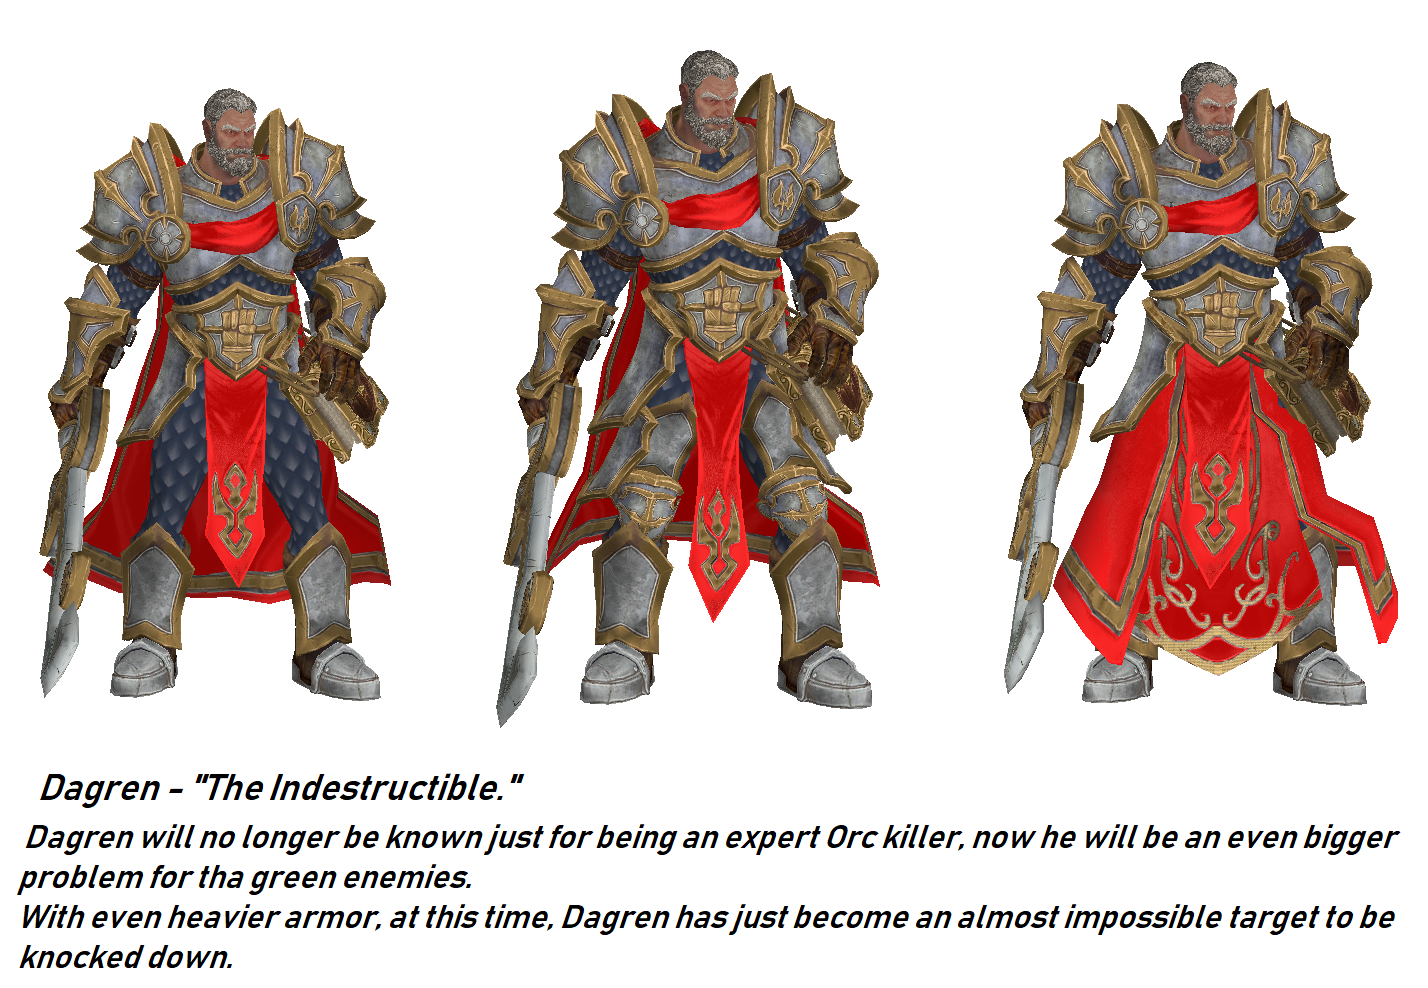 New Dagren- Our even more armored hero.